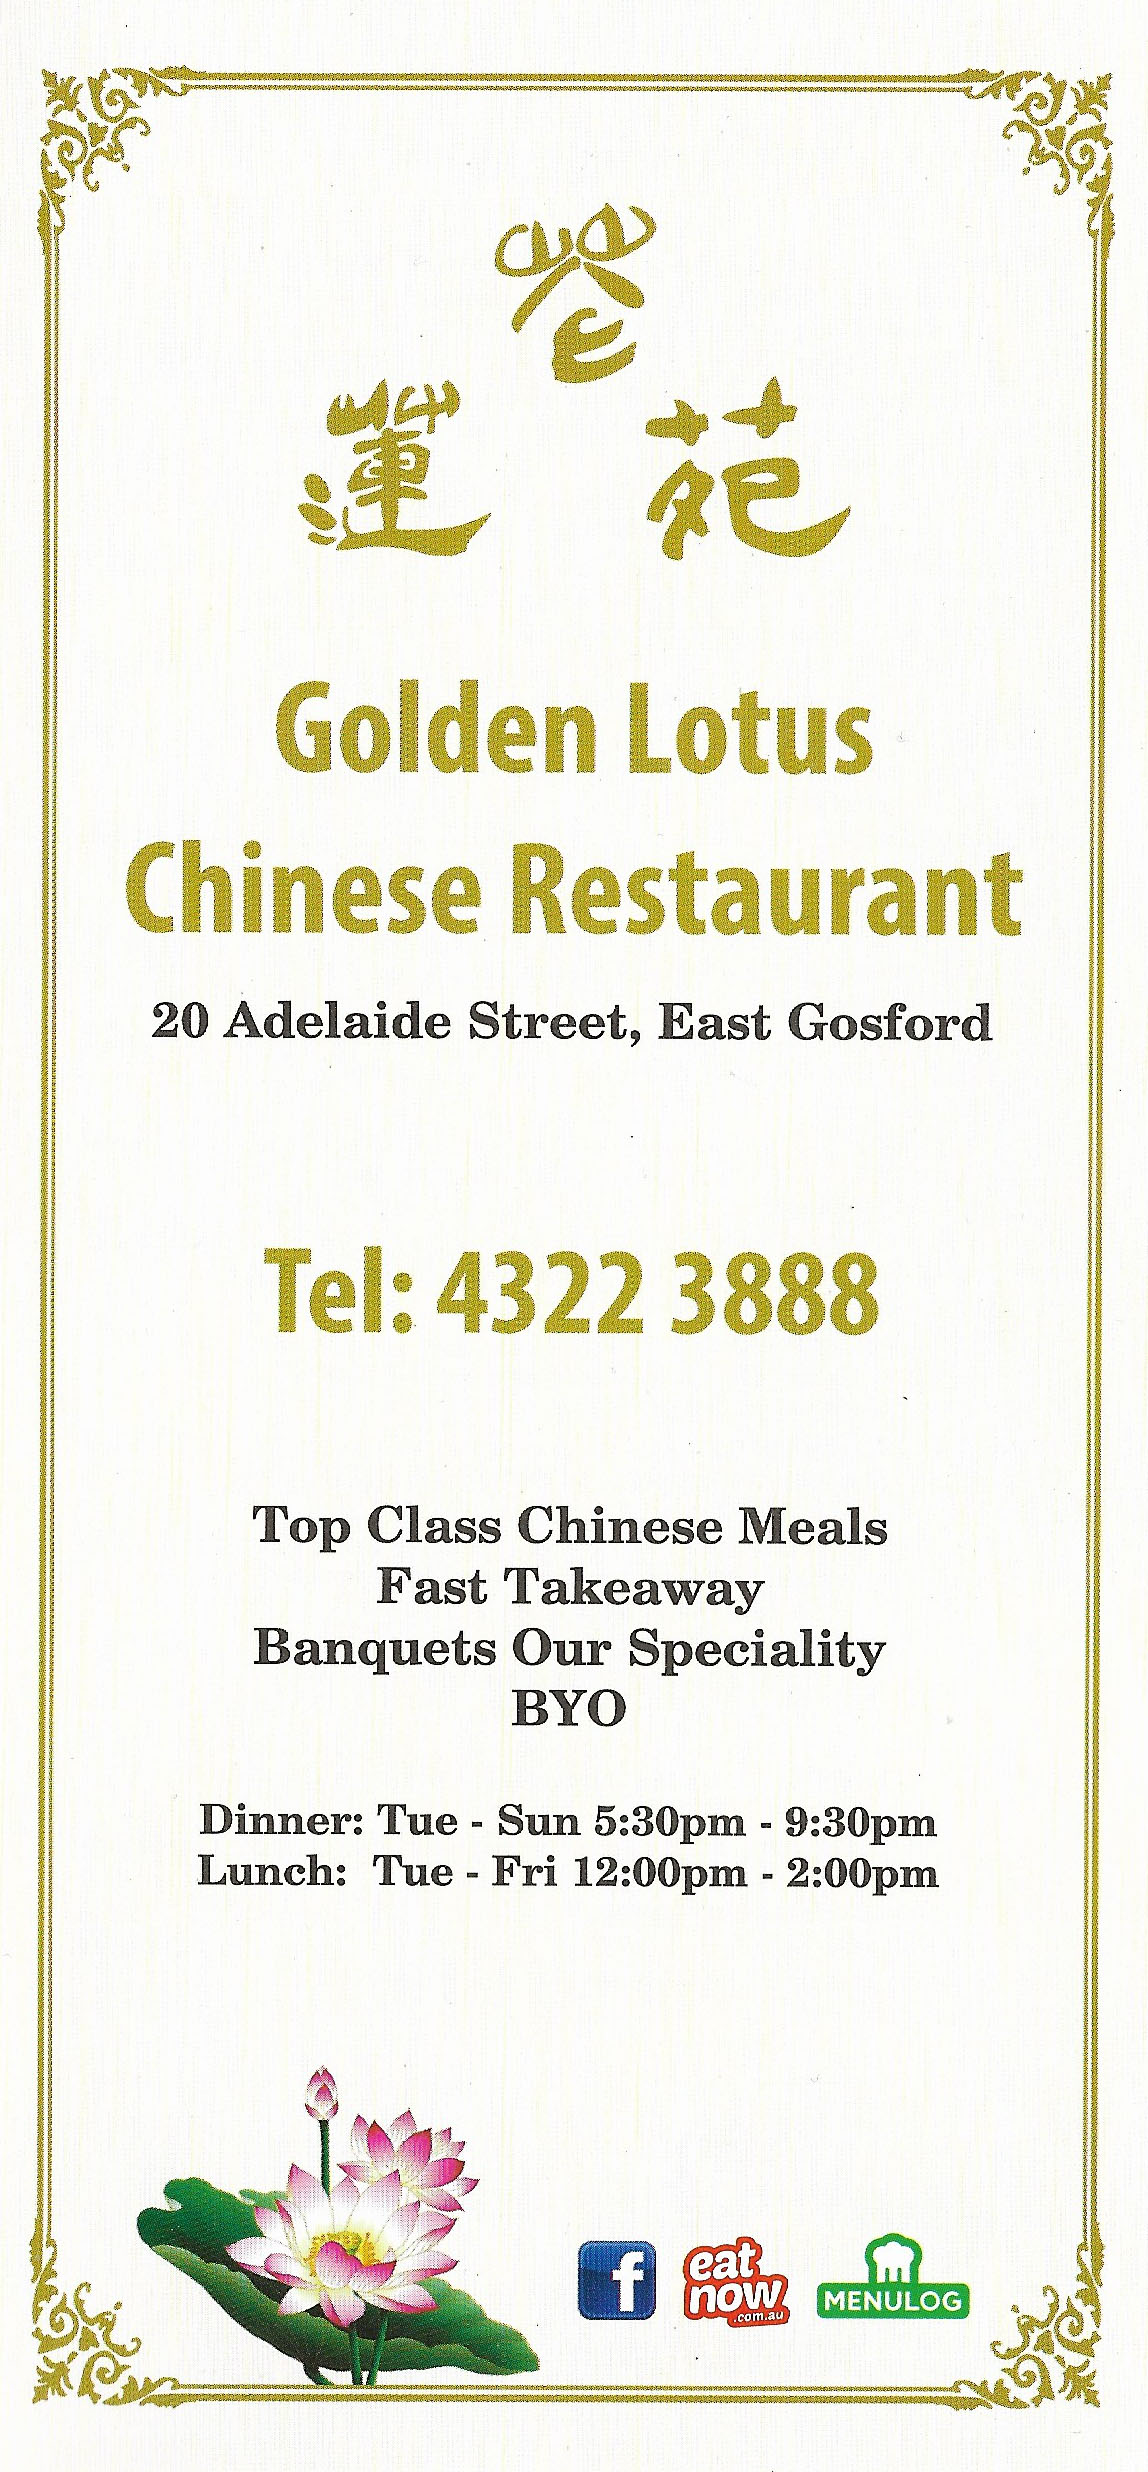 Golden Lotus Chinese East Gosford Central Coast - NSW | OBZ Online Business Zone